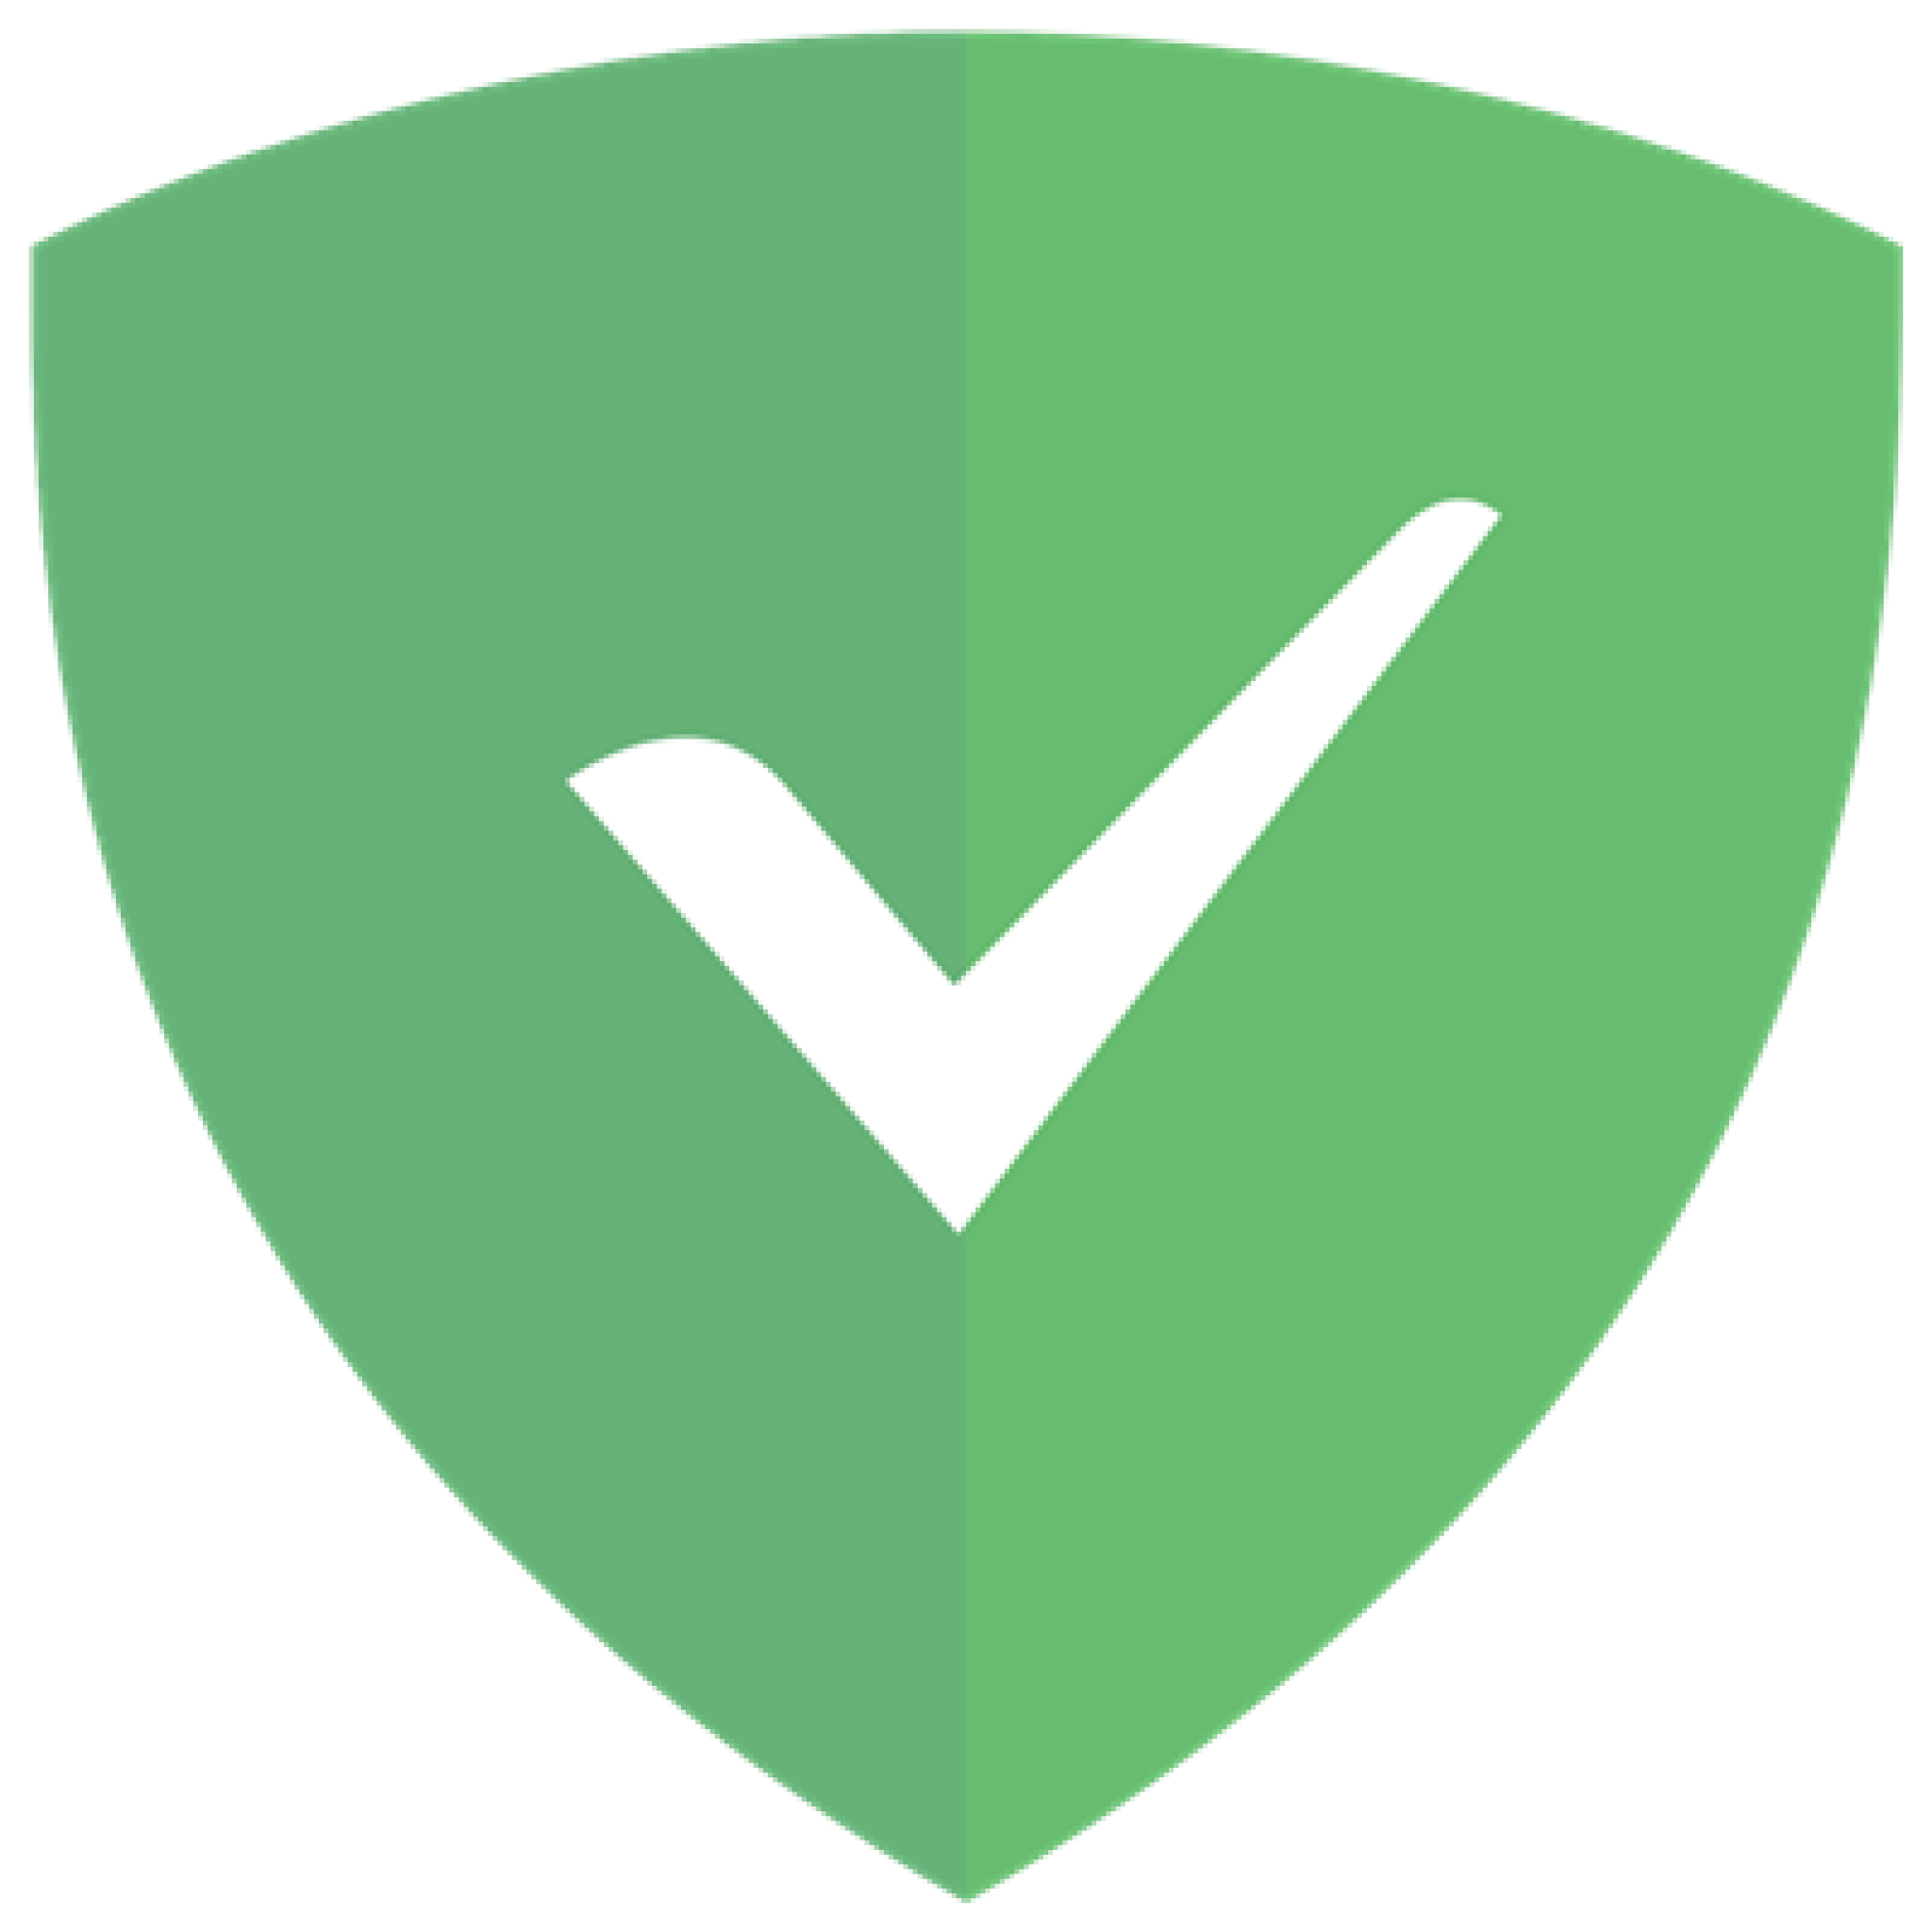 adguard software download